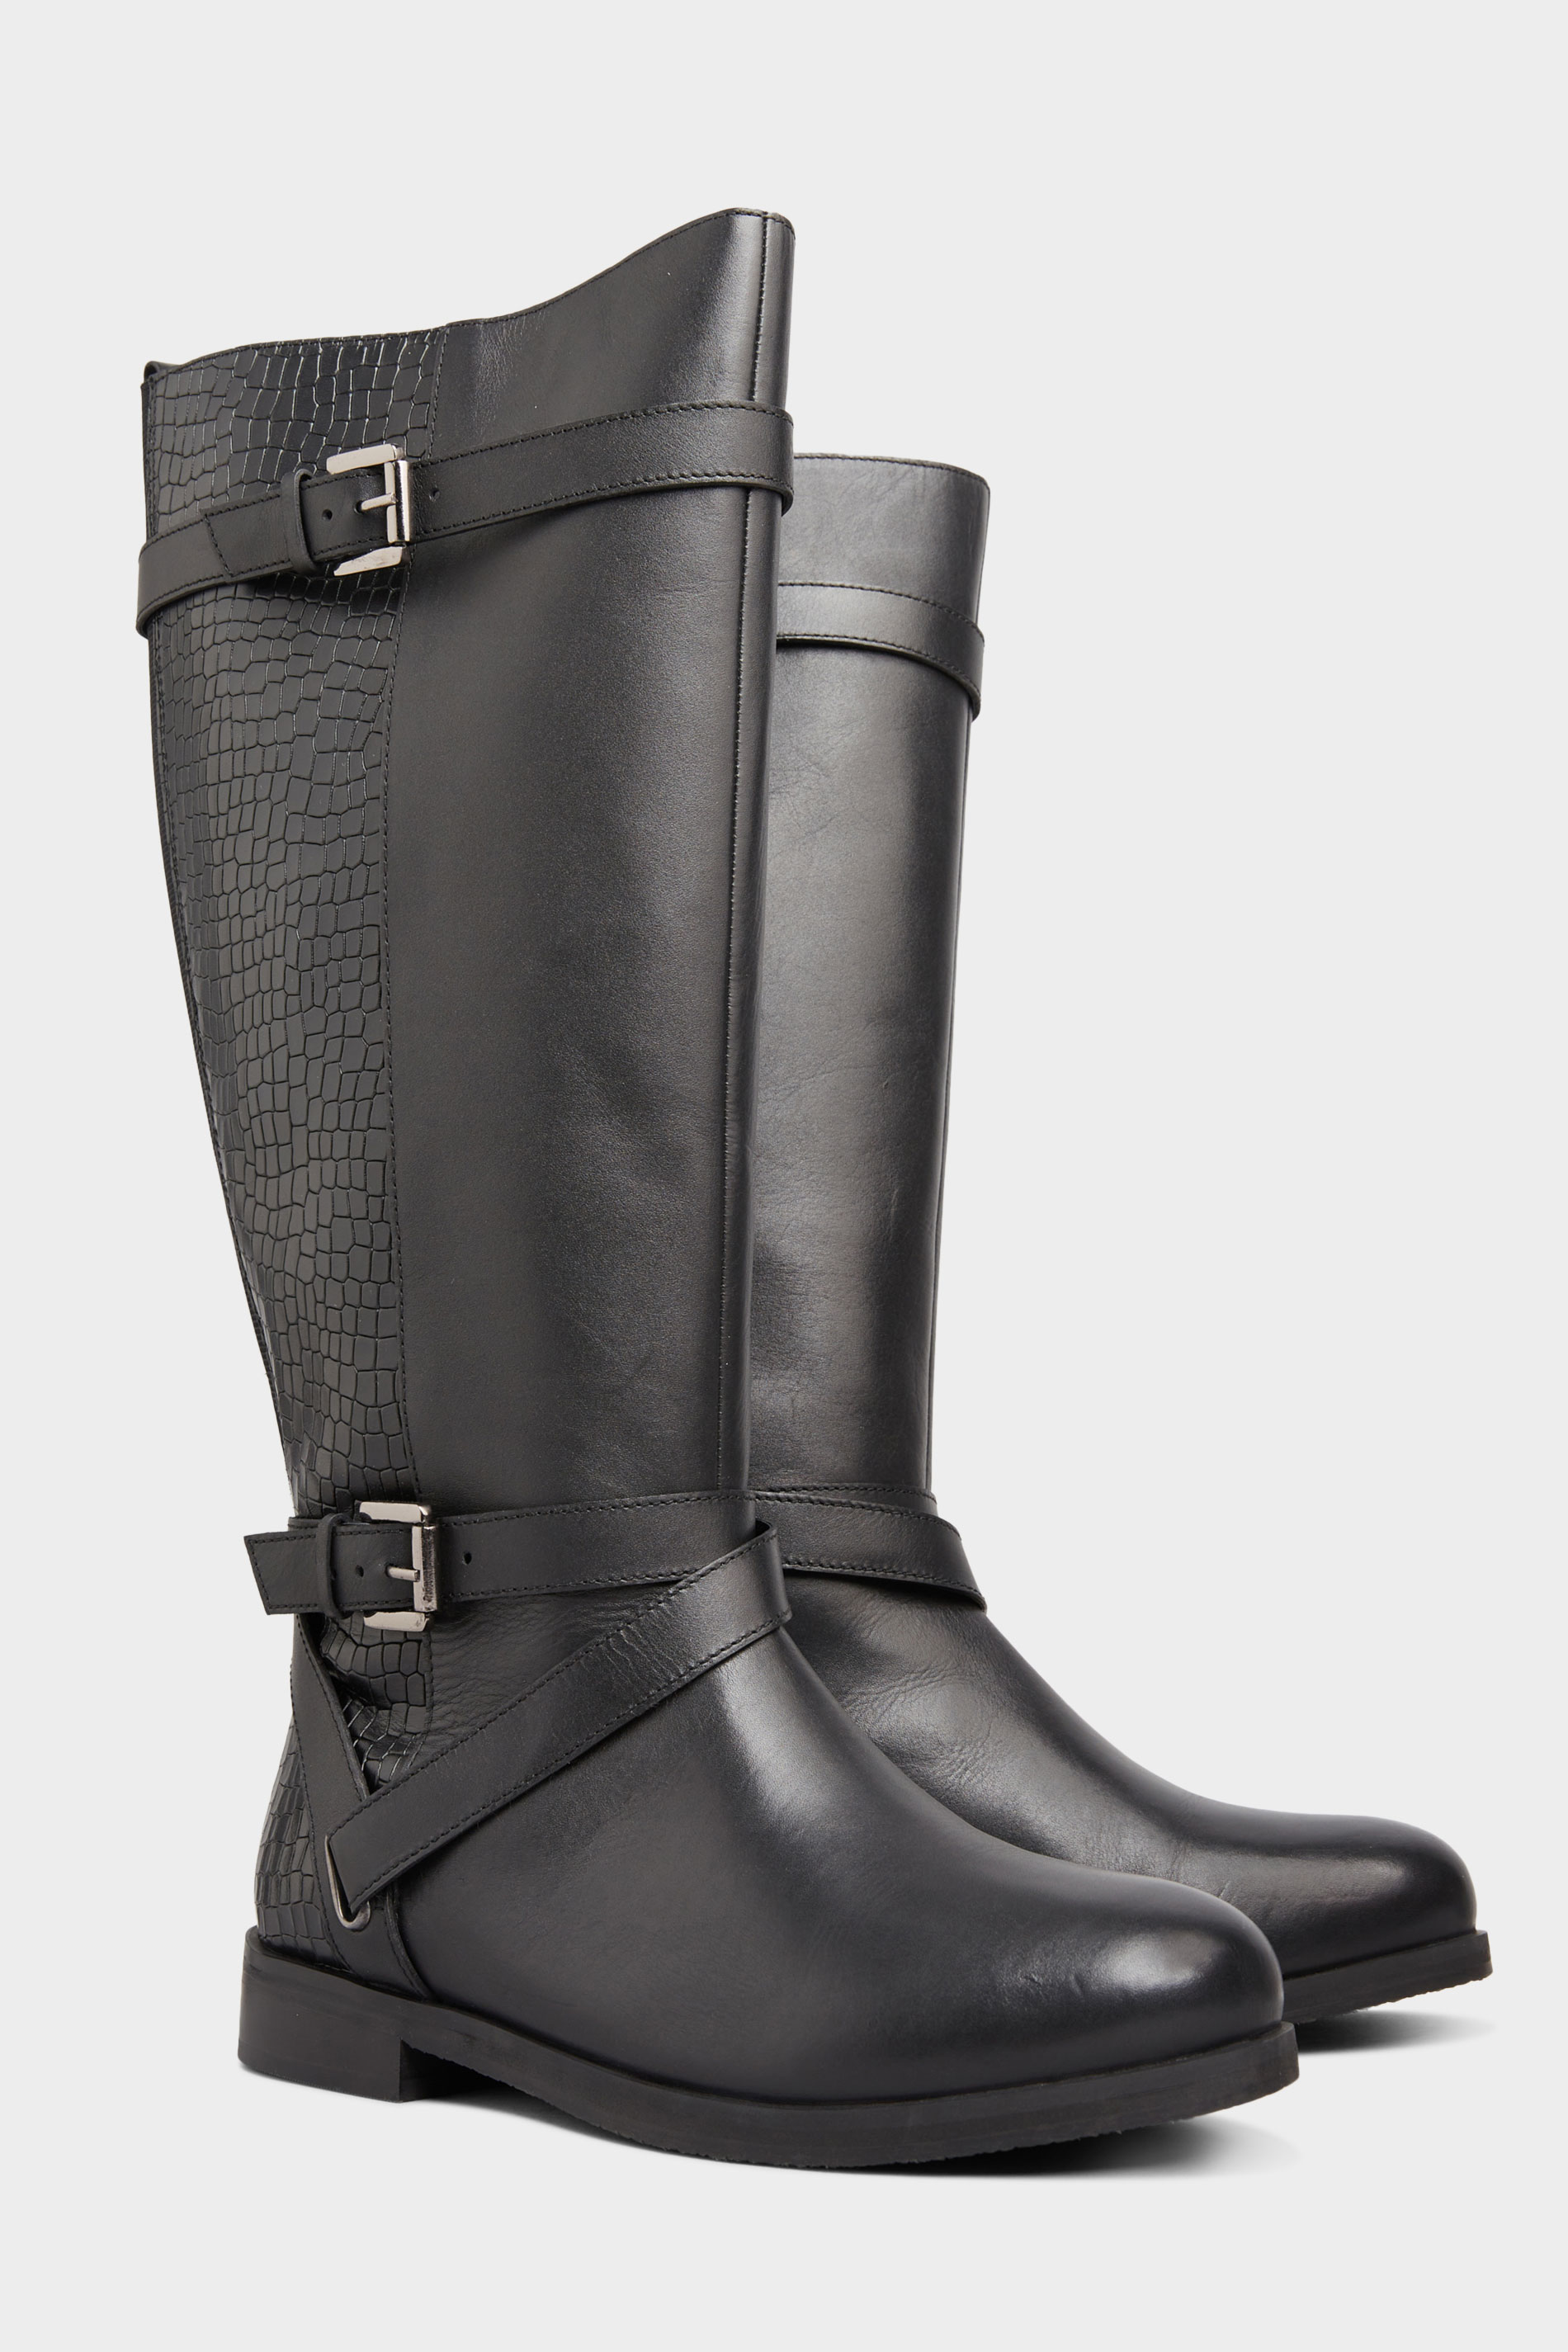 Black Leather Buckle Calf Knee High Riding Boots In Extra Wide EEE Fit 1